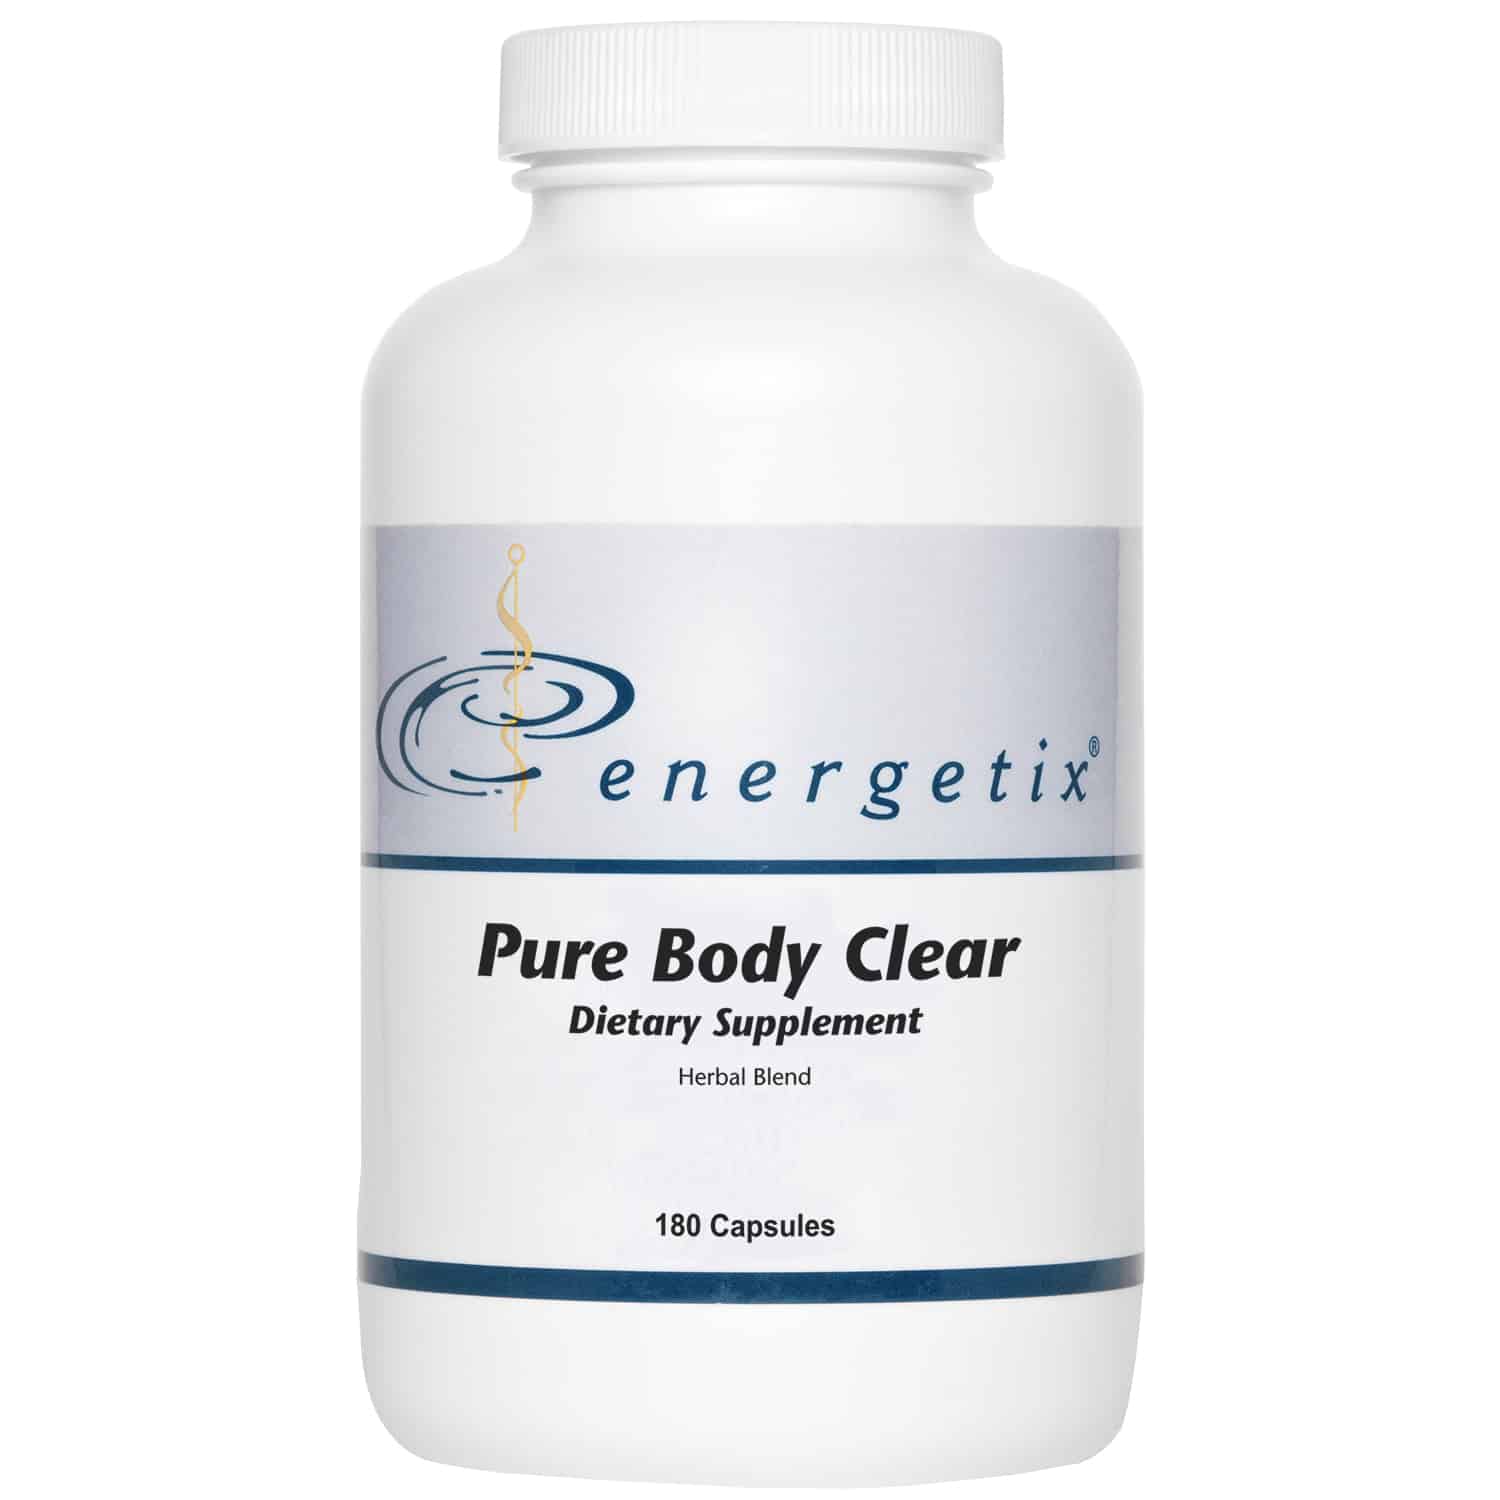 Pure Body Clear